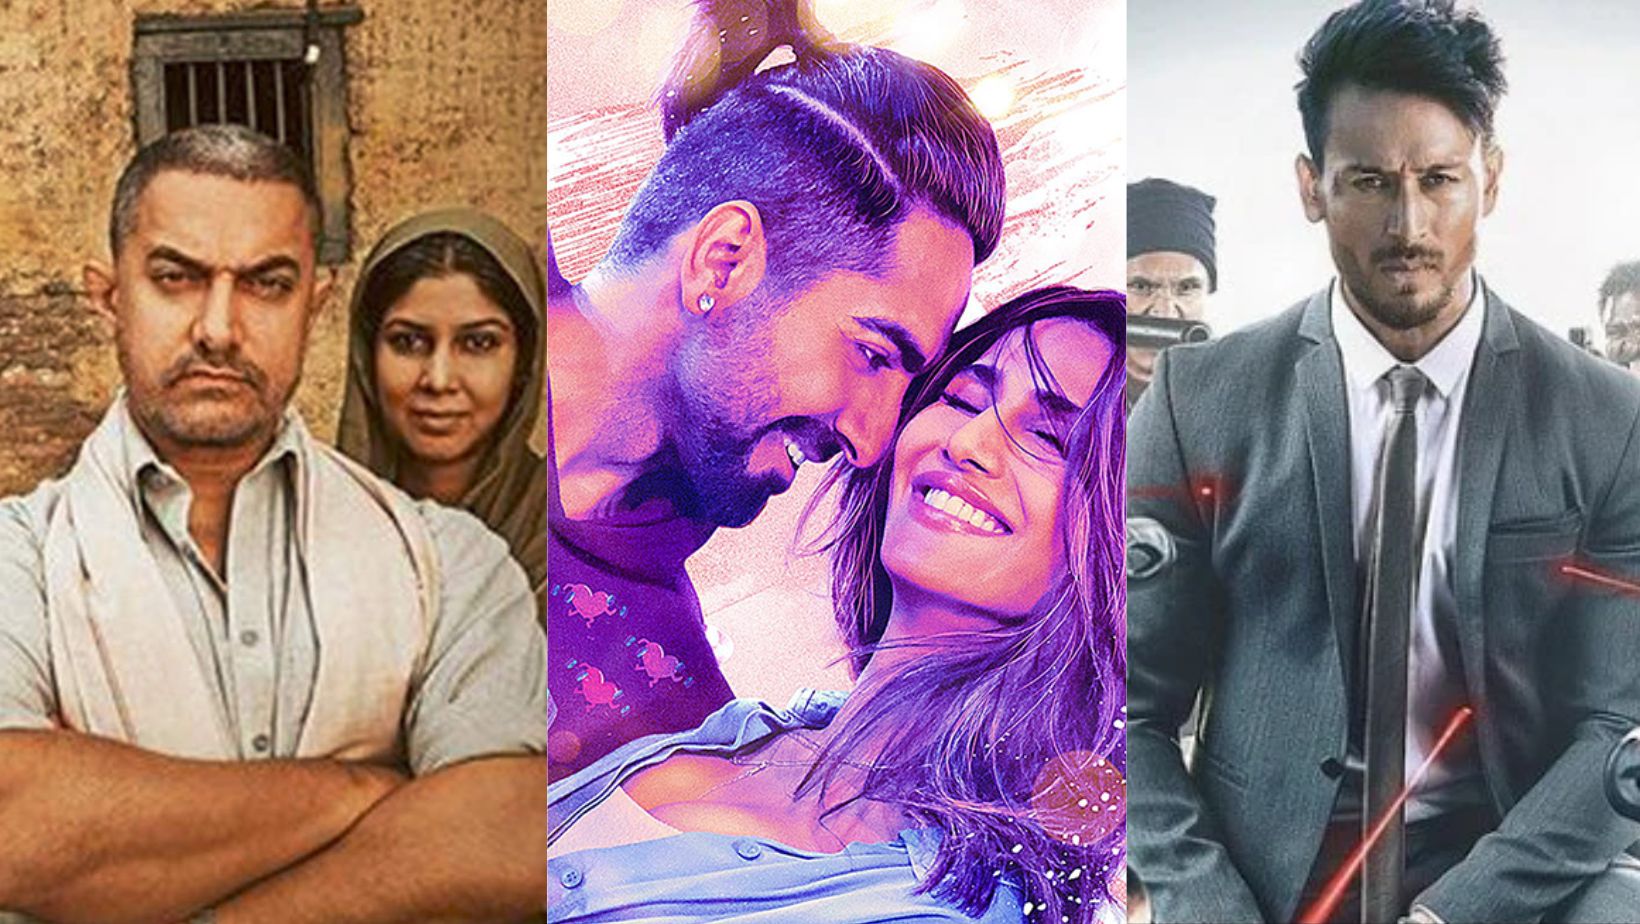 5 Bollywood Movies That Were Good But Still Promoted Some Messed Up Ideas. Wish They Could’ve Done It Differently!